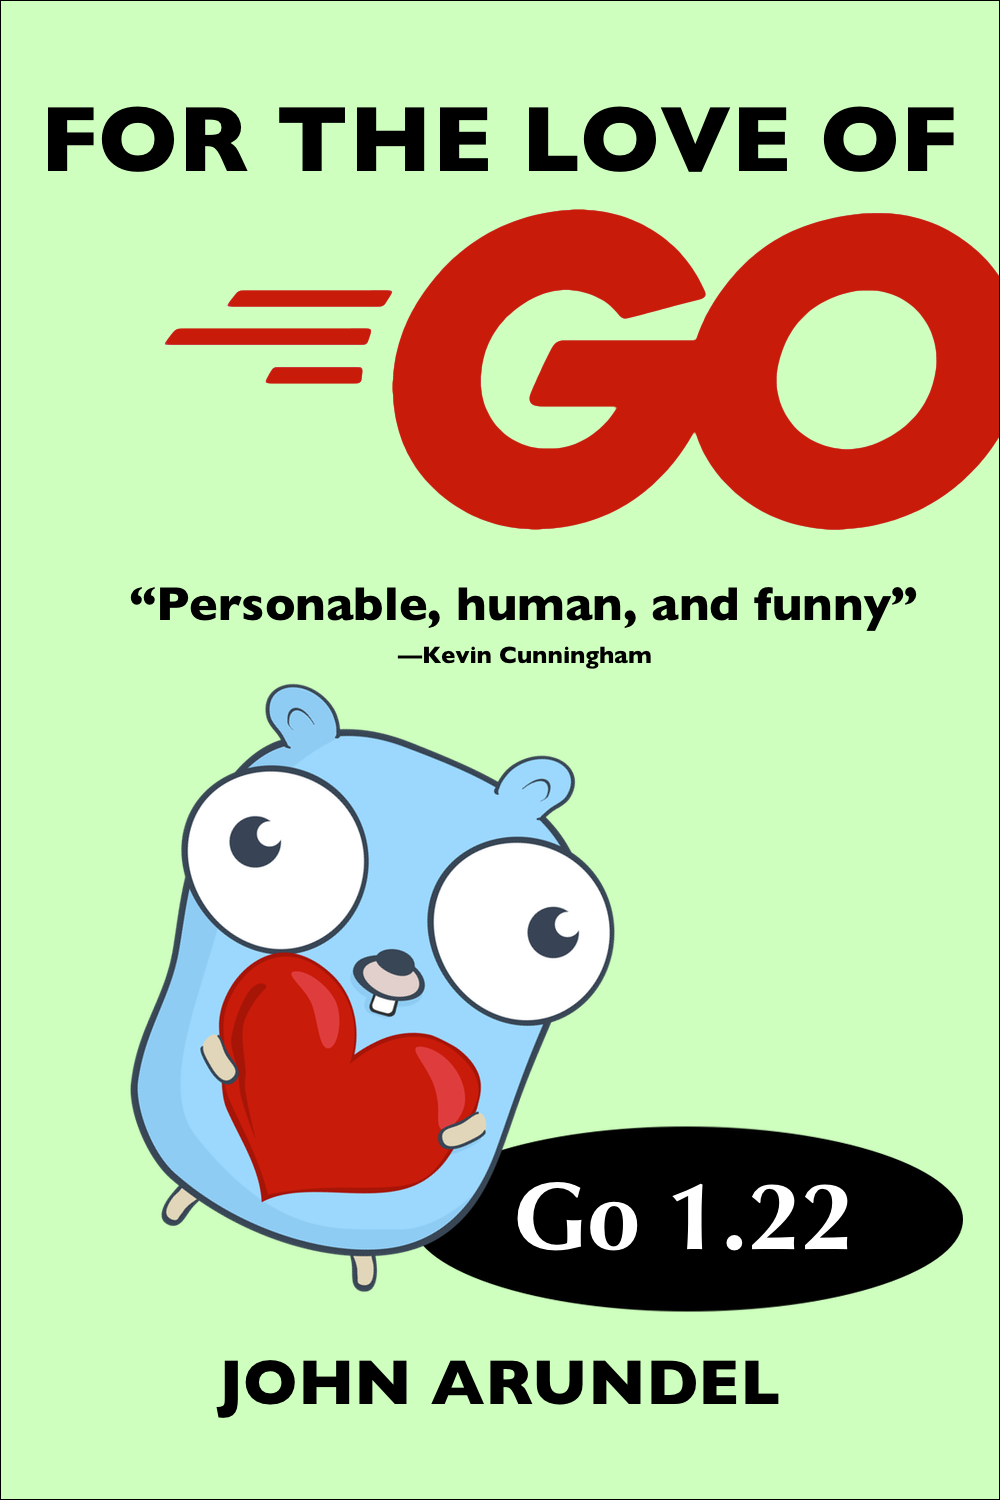 For the Love of Go (Go 1.22 edition)